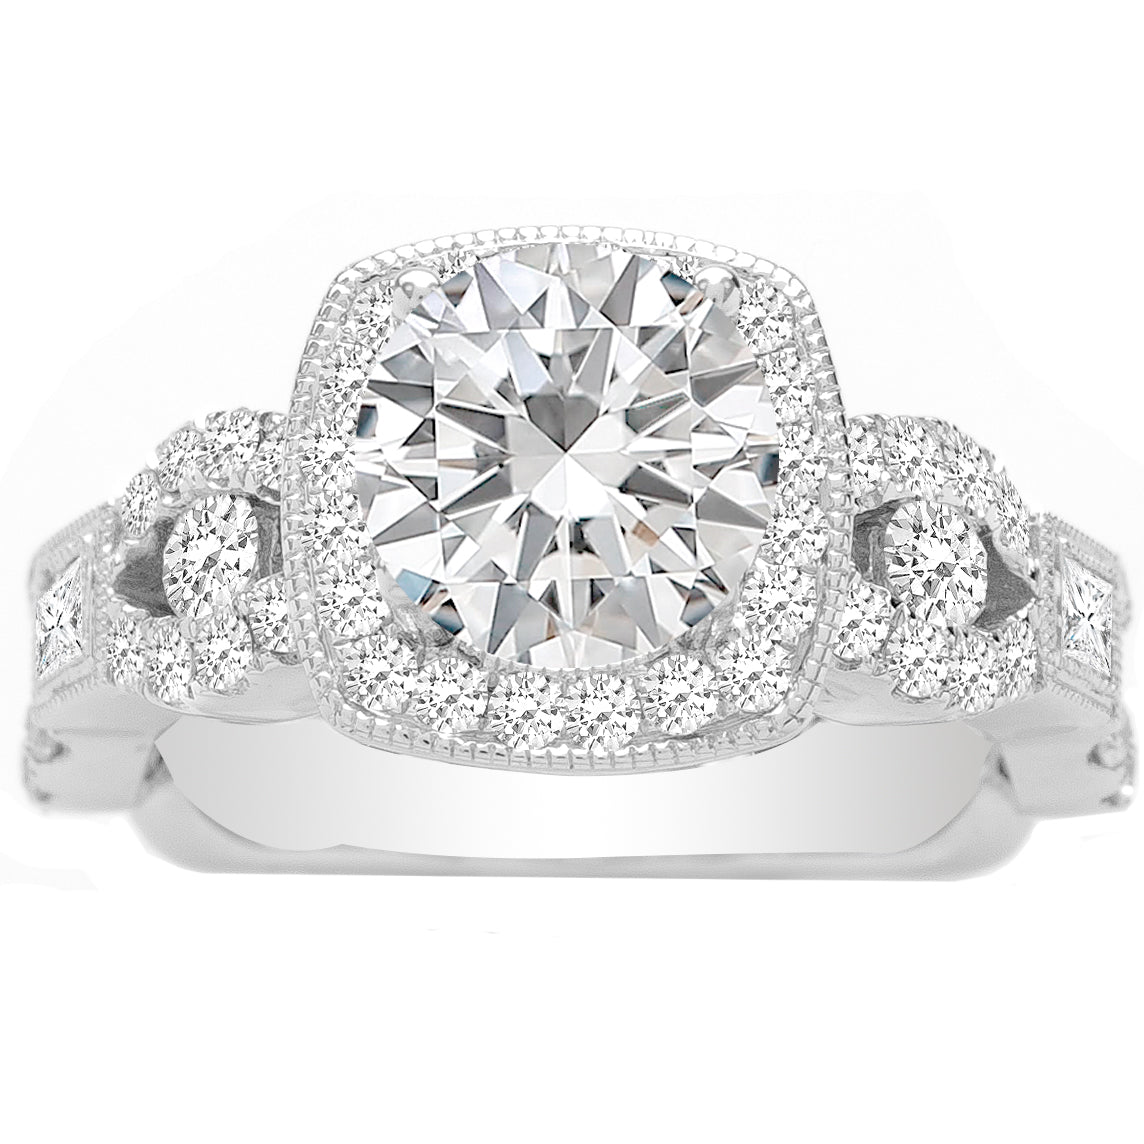 Quendalyn Engagement Ring Setting in 14K White Gold; 0.81 ctw